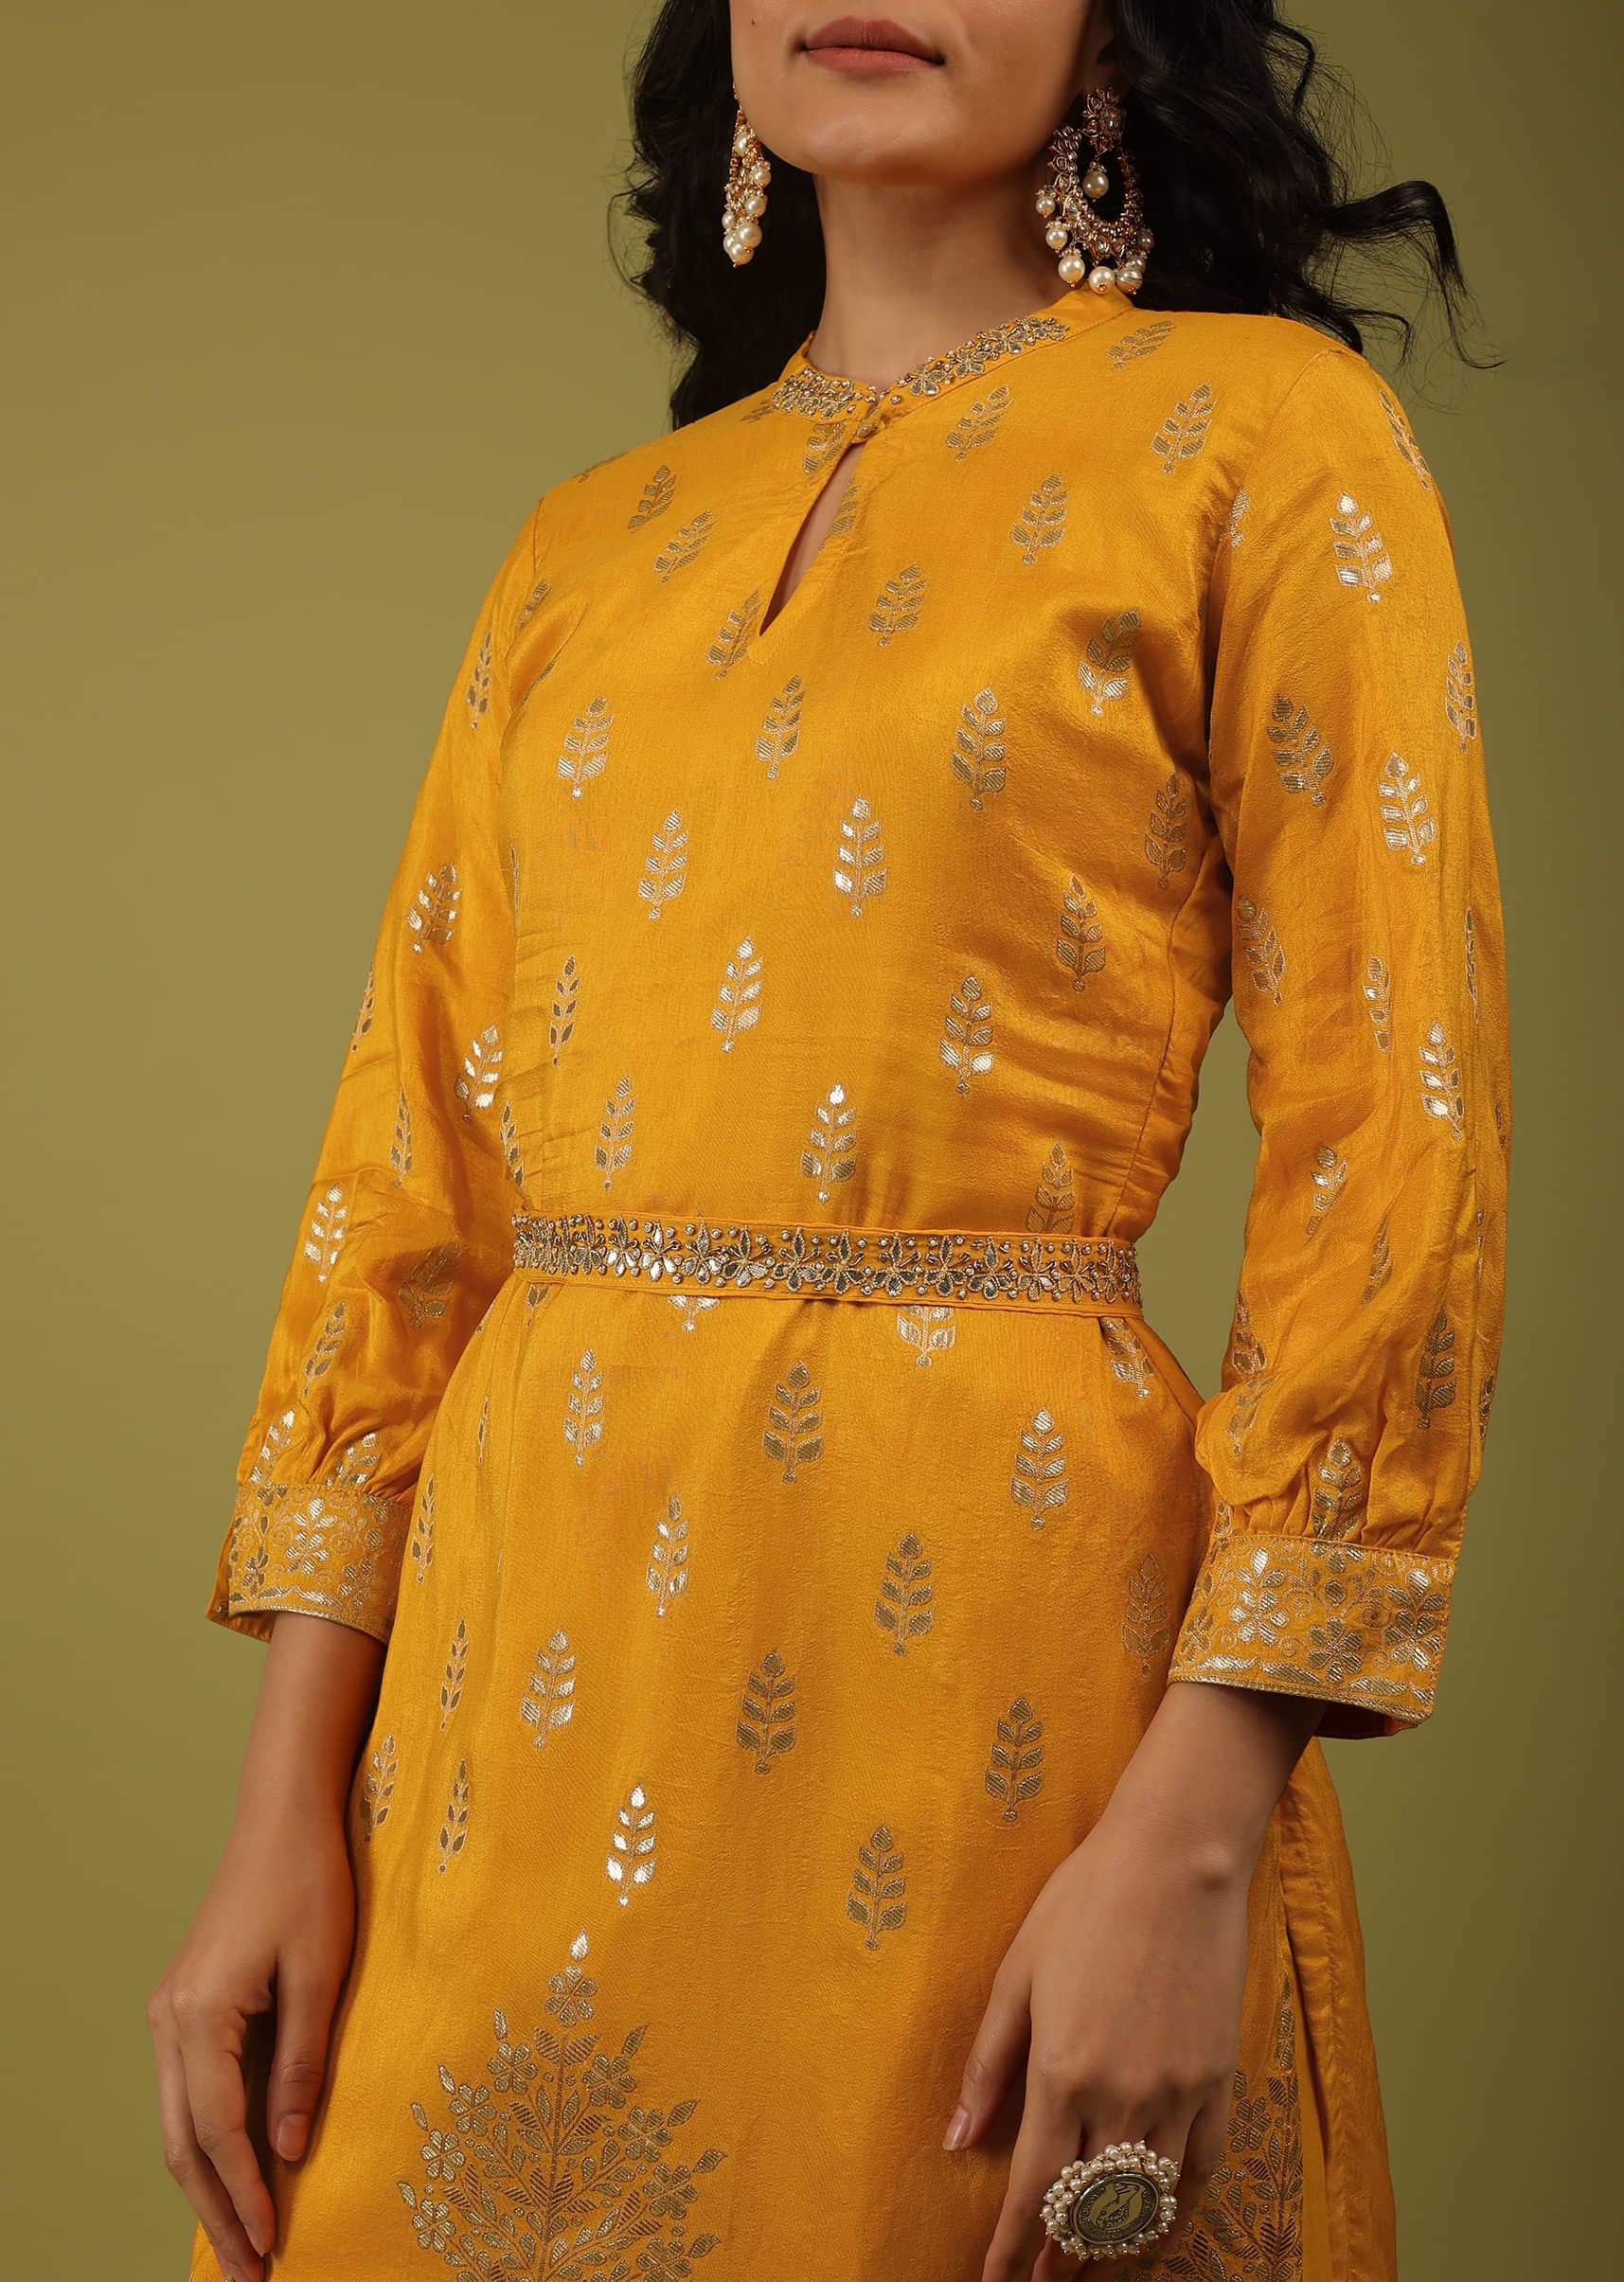 Radiant Yellow Gharara Suit Set In Brocade With Embroidery In Dola Silk